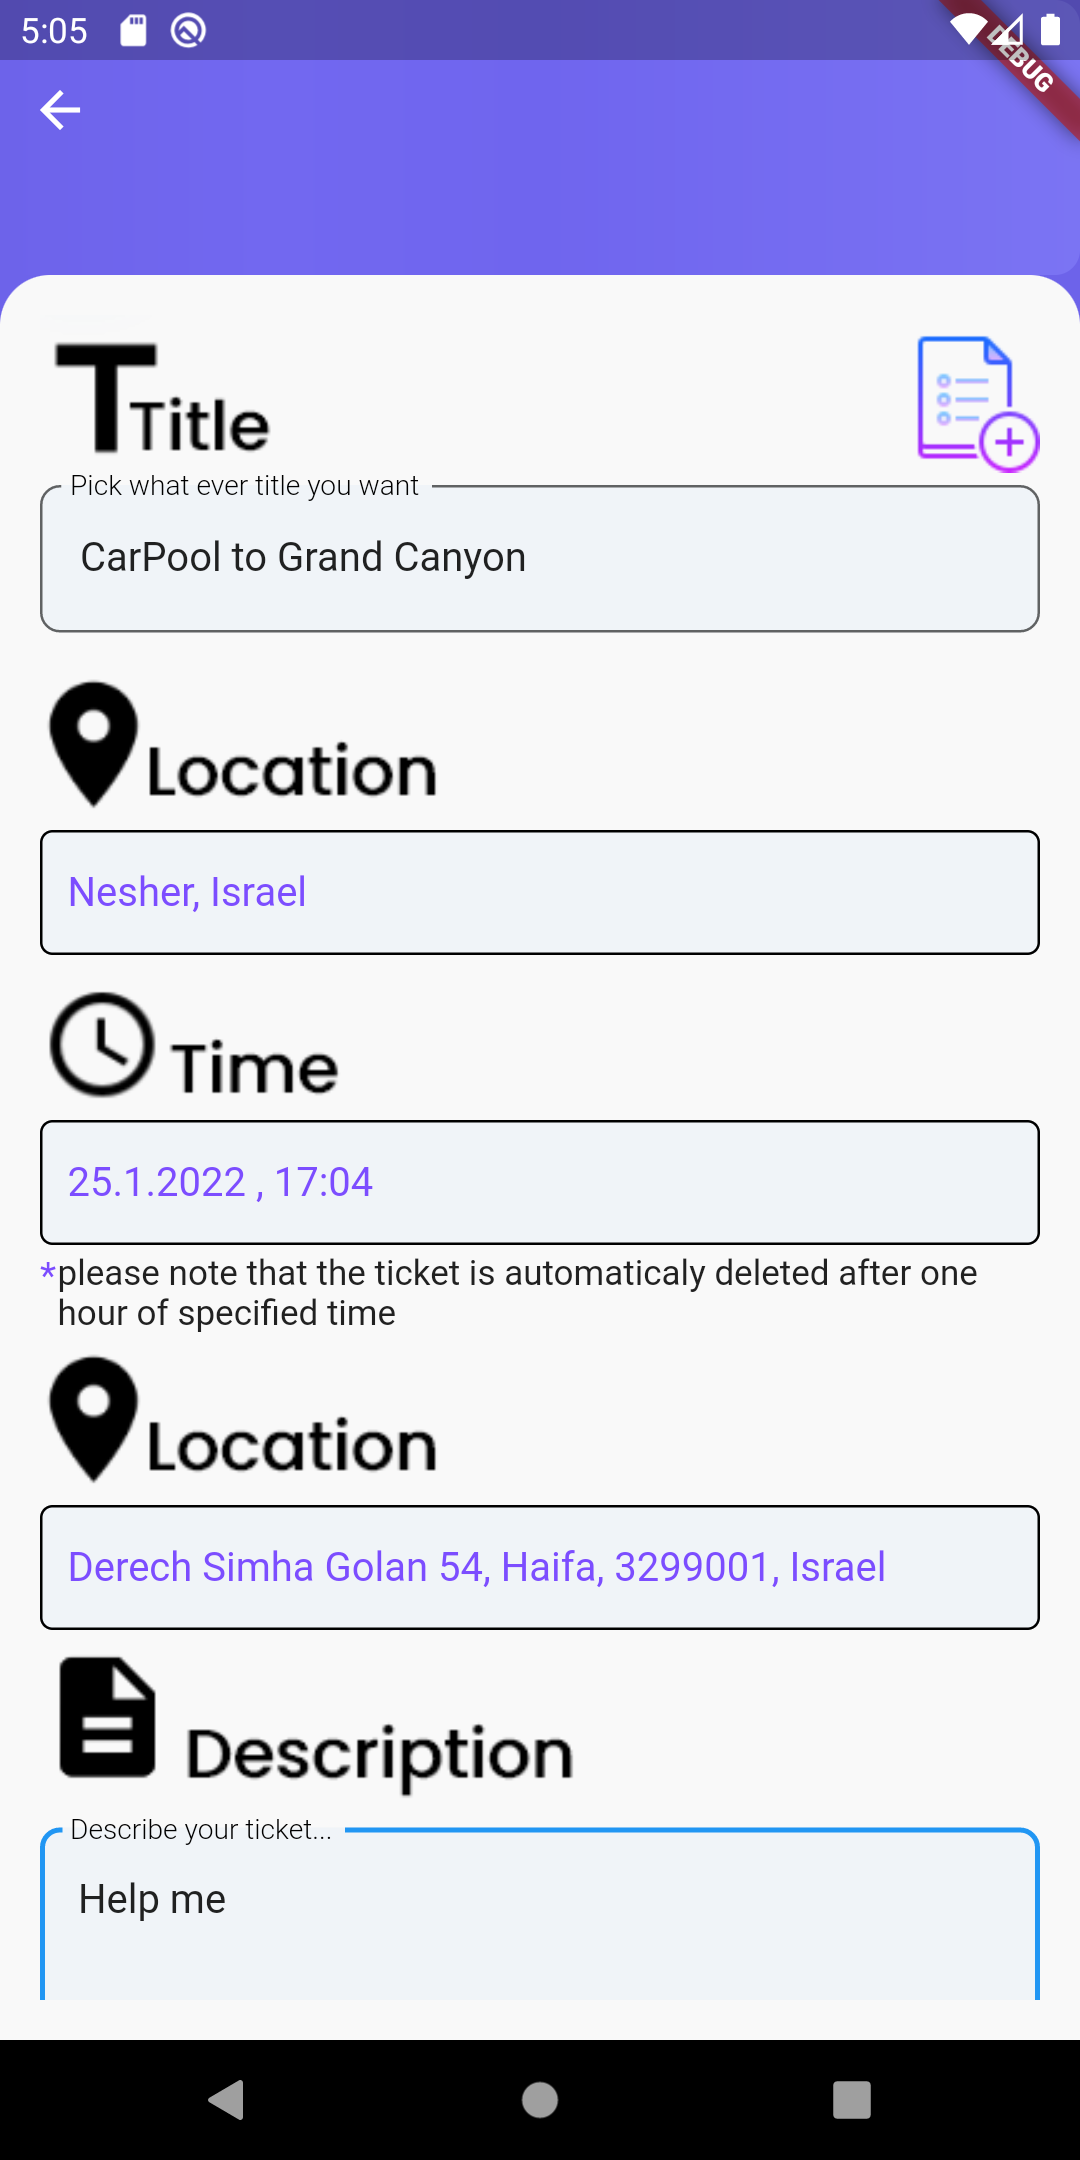 An application whose goal is to provide essential services for the Technion students